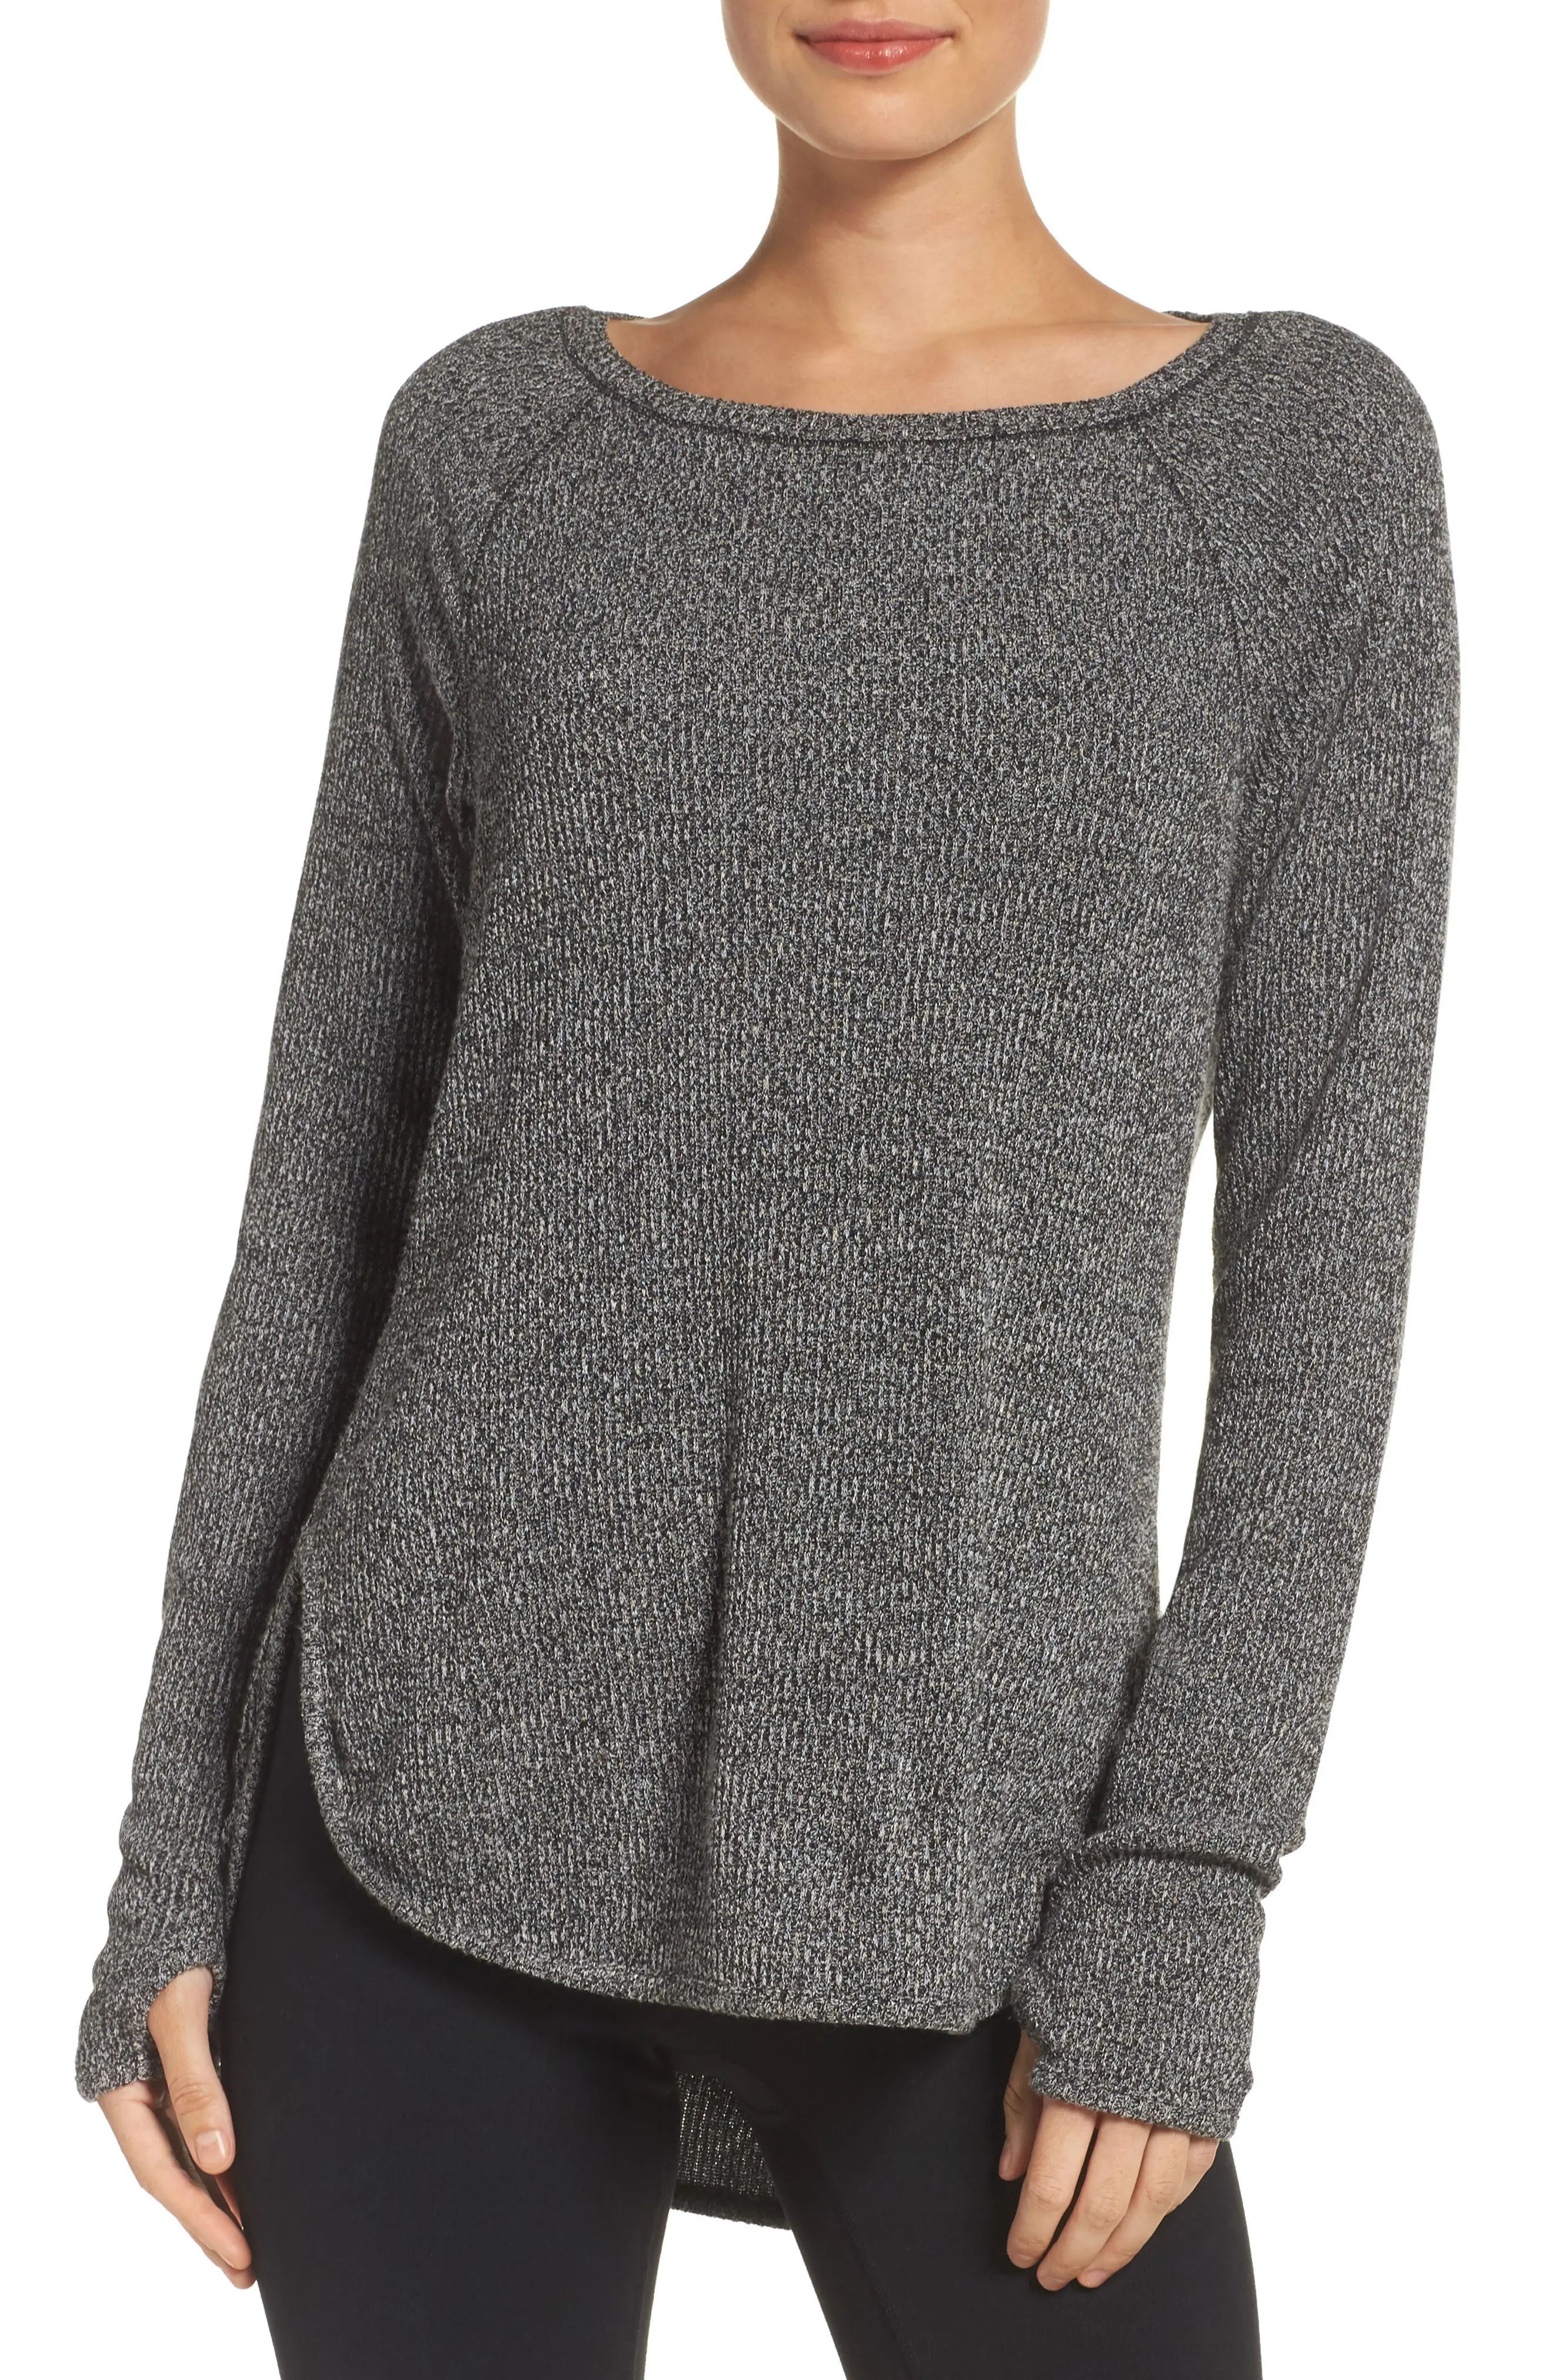 Don't Sweat It Sweater | Nordstrom